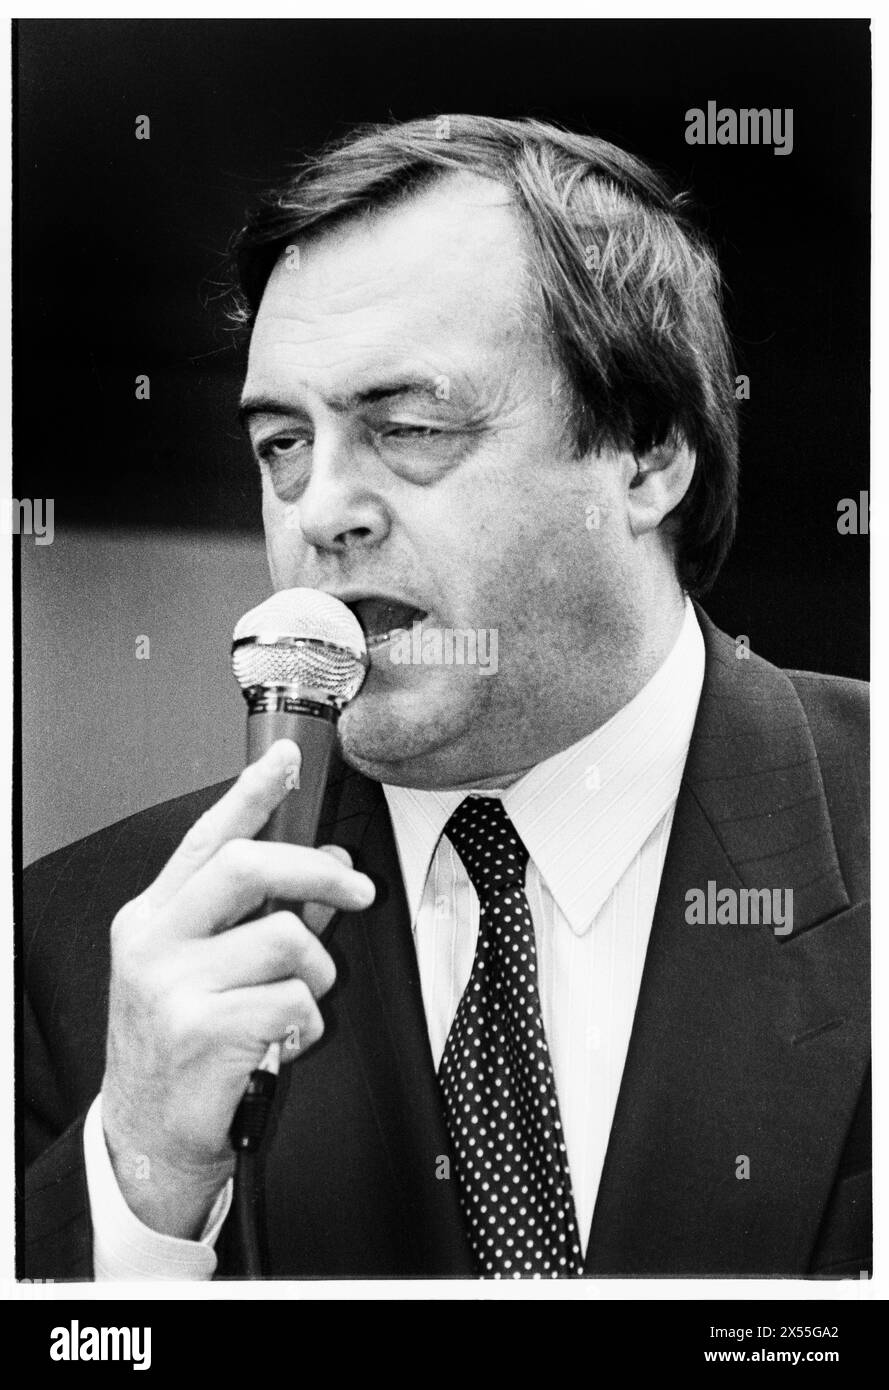 JOHN PRESCOTT, DEPUTY LEADER, LABOUR PARTY, 1995: Deputy Leader of the Labour Party John Pescott makes a passionate speech campaigning for New Labour on the Rolling Rose Tour at St David's Hall in Cardiff, Wales UK on 5 July 1995. The Rolling Rose Tour was a series of hustings designed to increase Labour Party membership while in opposition.  Photo: Rob Watkins.  INFO: John Prescott, a British politician born in Prestatyn Wales in 1938, served as Deputy Prime Minister under Tony Blair from 1997 to 2007. A prominent figure in the Labour Party, he championed social justice and environmental caus Stock Photo